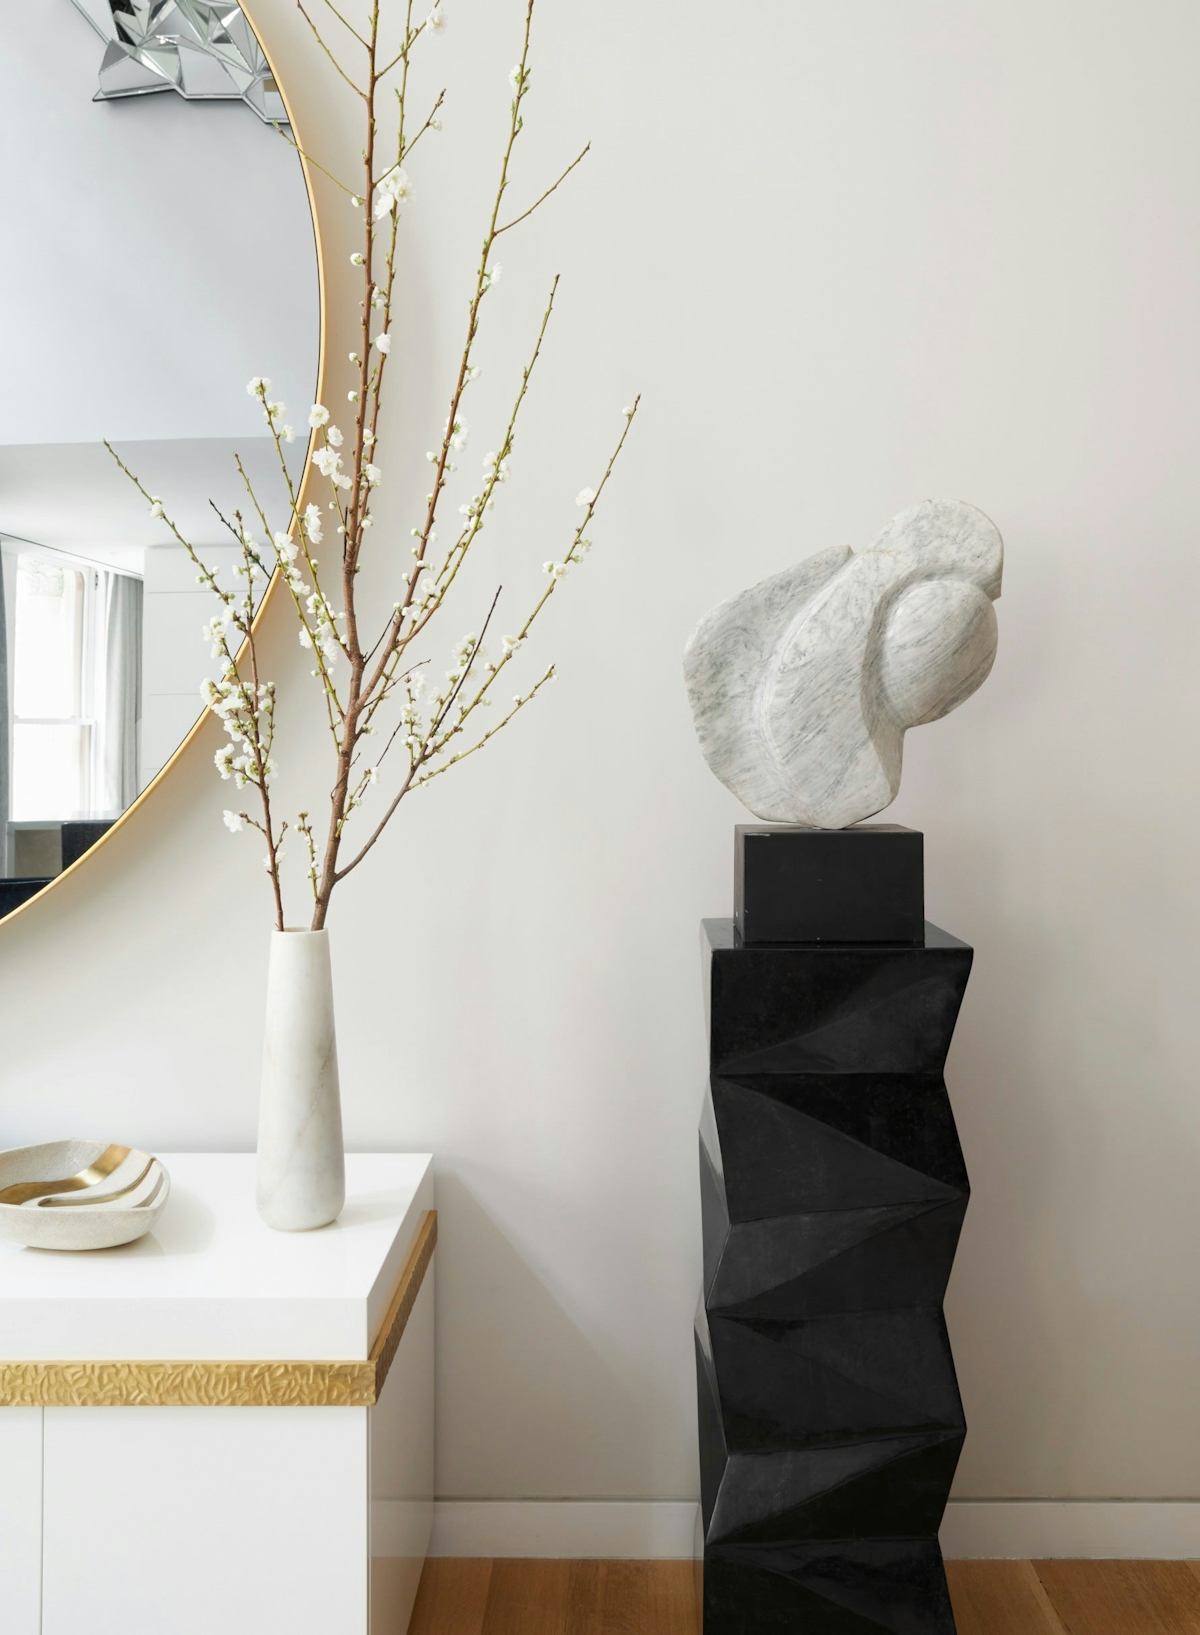 How To Decorate Empty Living Room Corners | Interior by Jordan Carlyle | Shop contemporary sculptures online at LuxDeco.com1